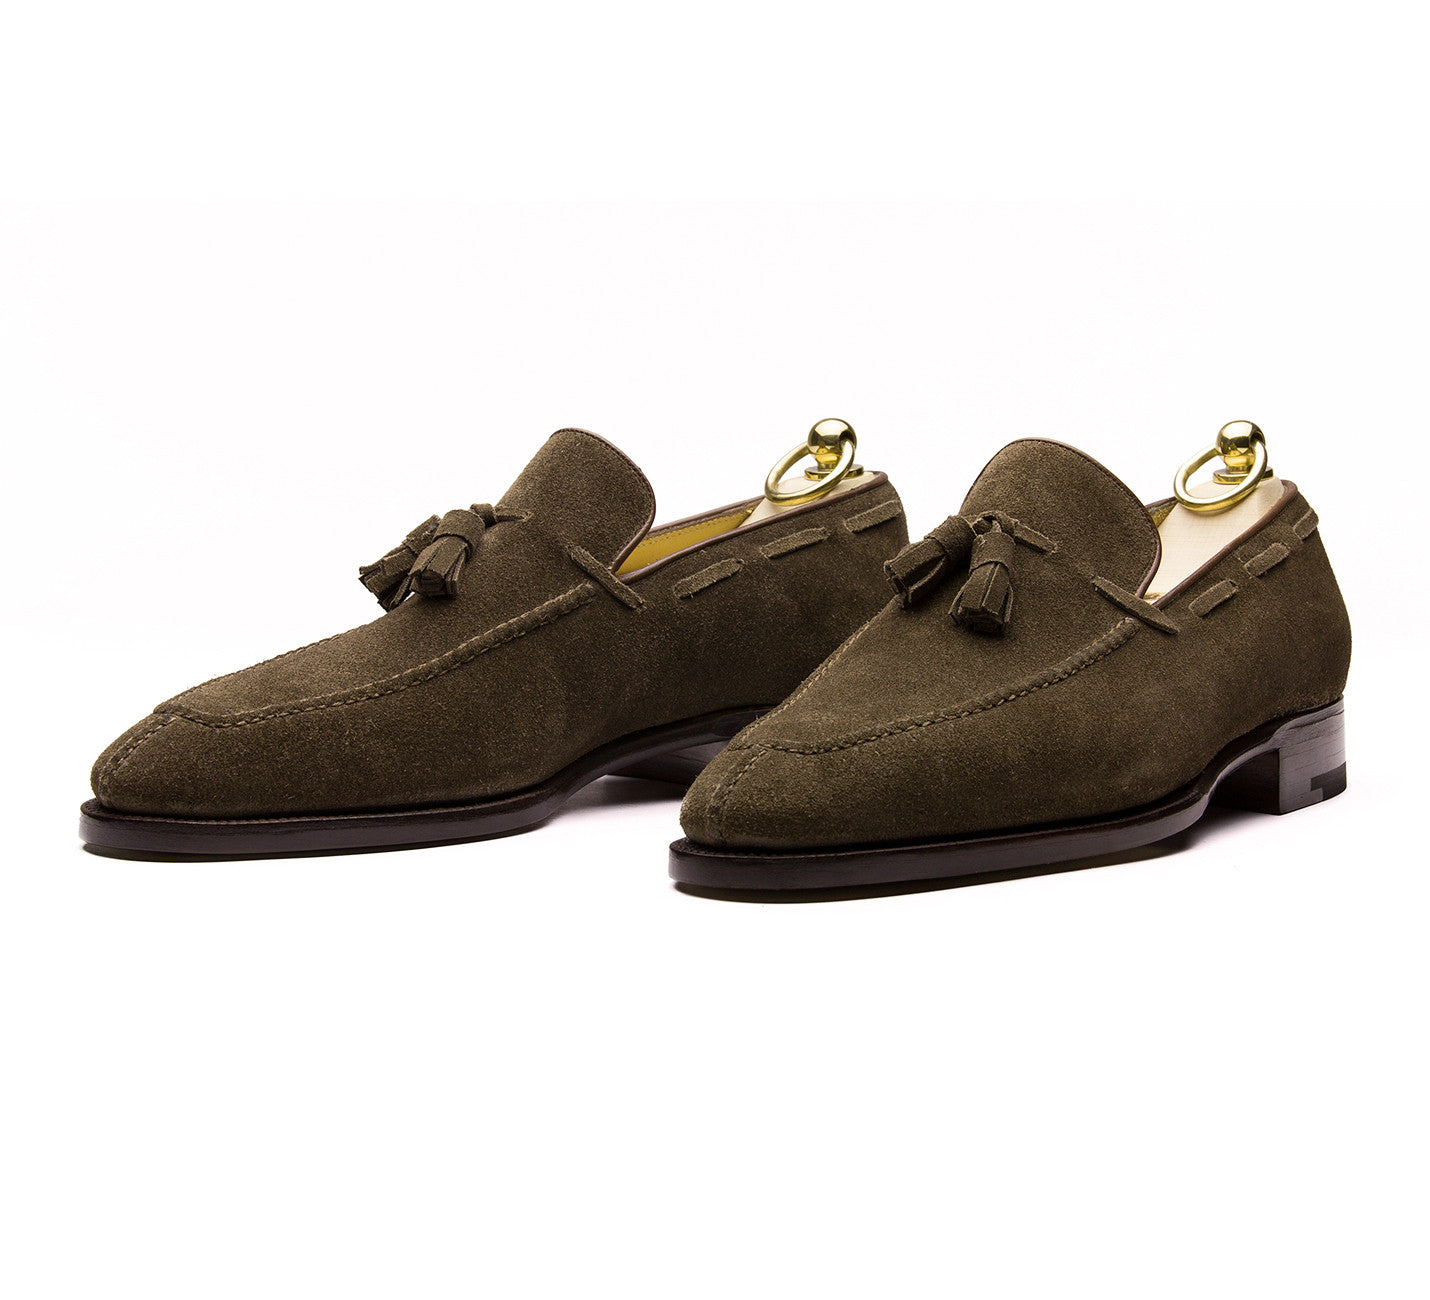 Stefano Bemer Style 1210 Loafer - Olive Bal Suede - Pair View